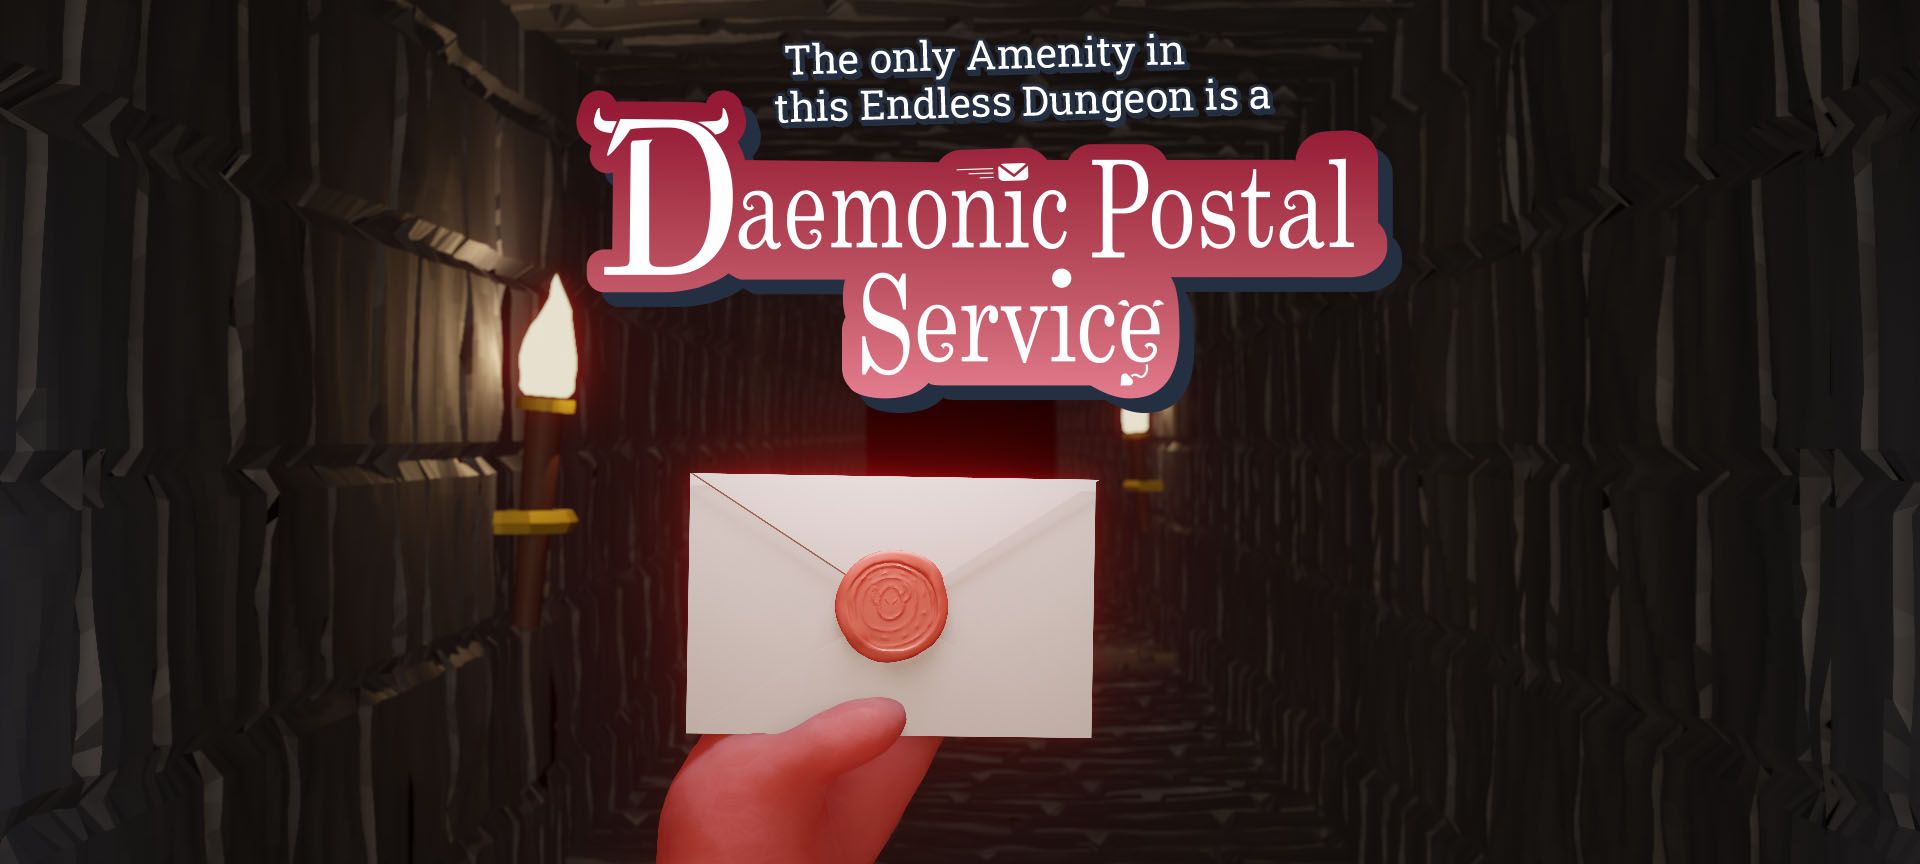 The only Amenity in this Endless Dungeon is a Daemonic Postal Service